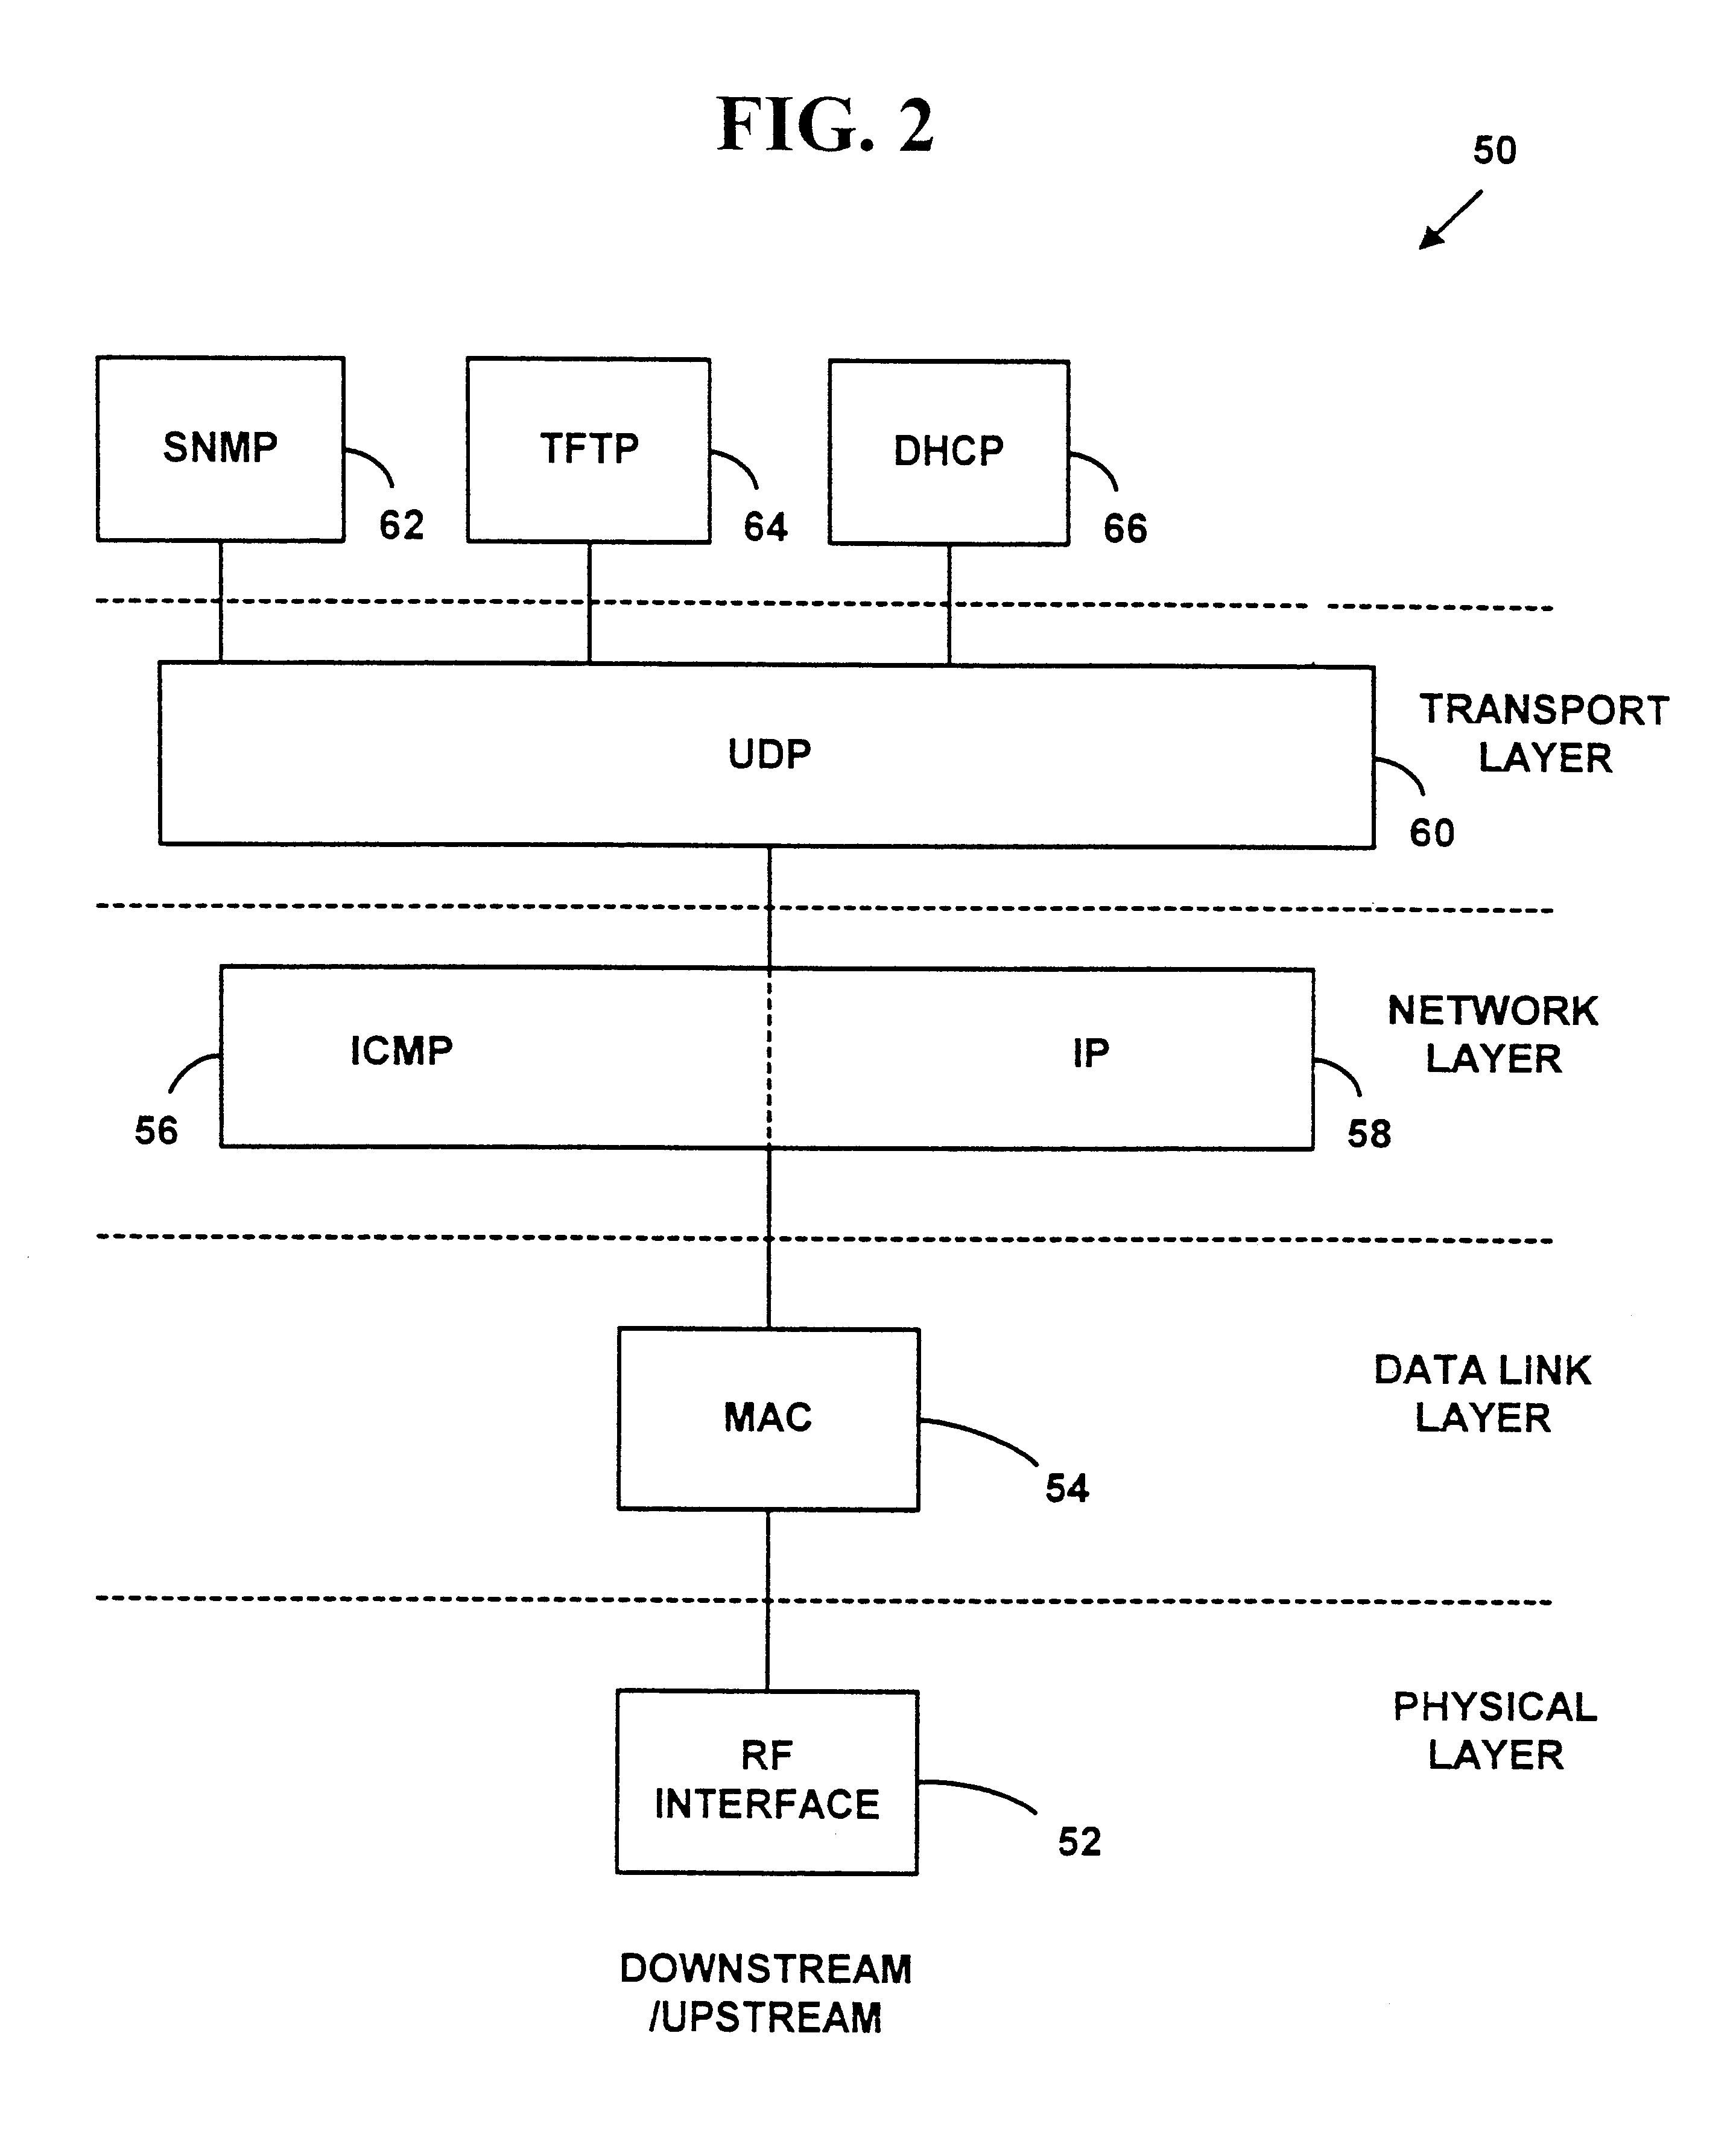 Upstream bandwidth allocation map (MAP)-initiated channel change method for data-over-cable systems